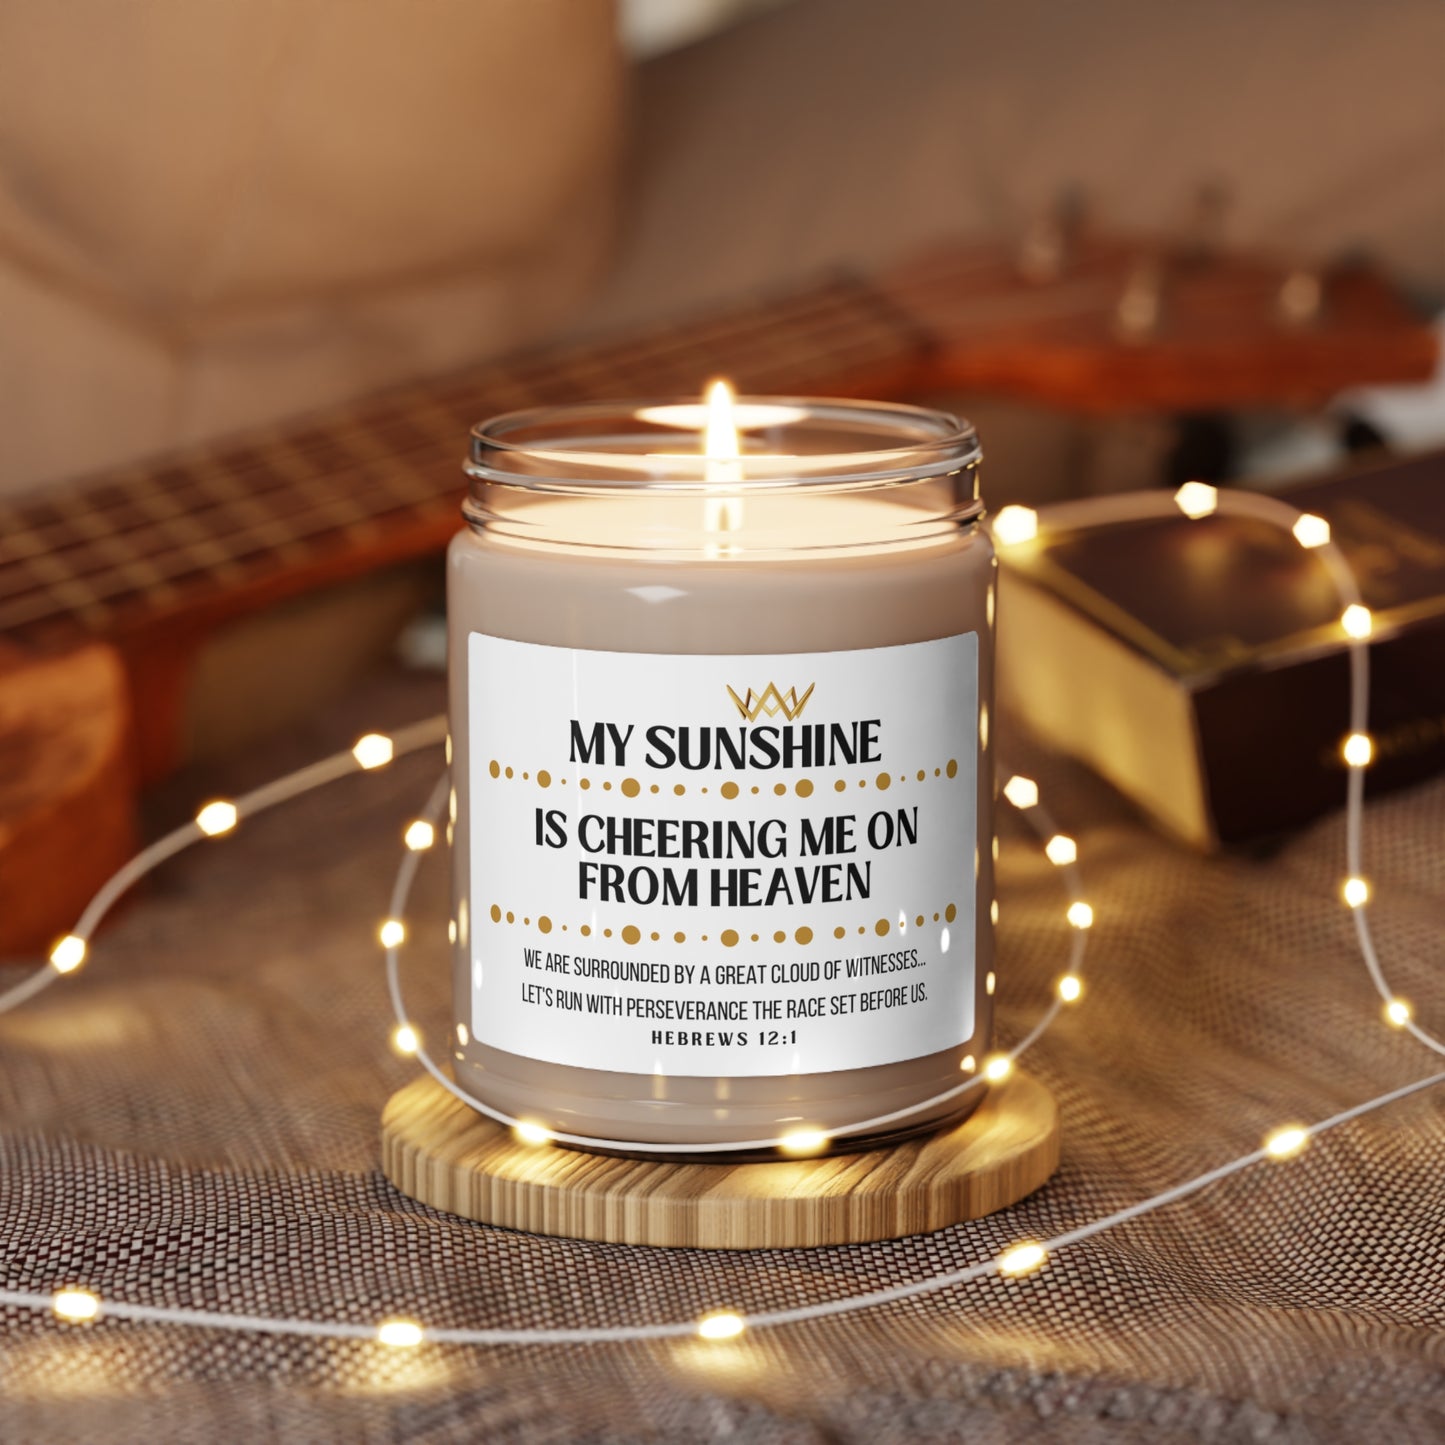 My Sunshine Memorial Scented Soy Candle, Cheering Me On From Heaven